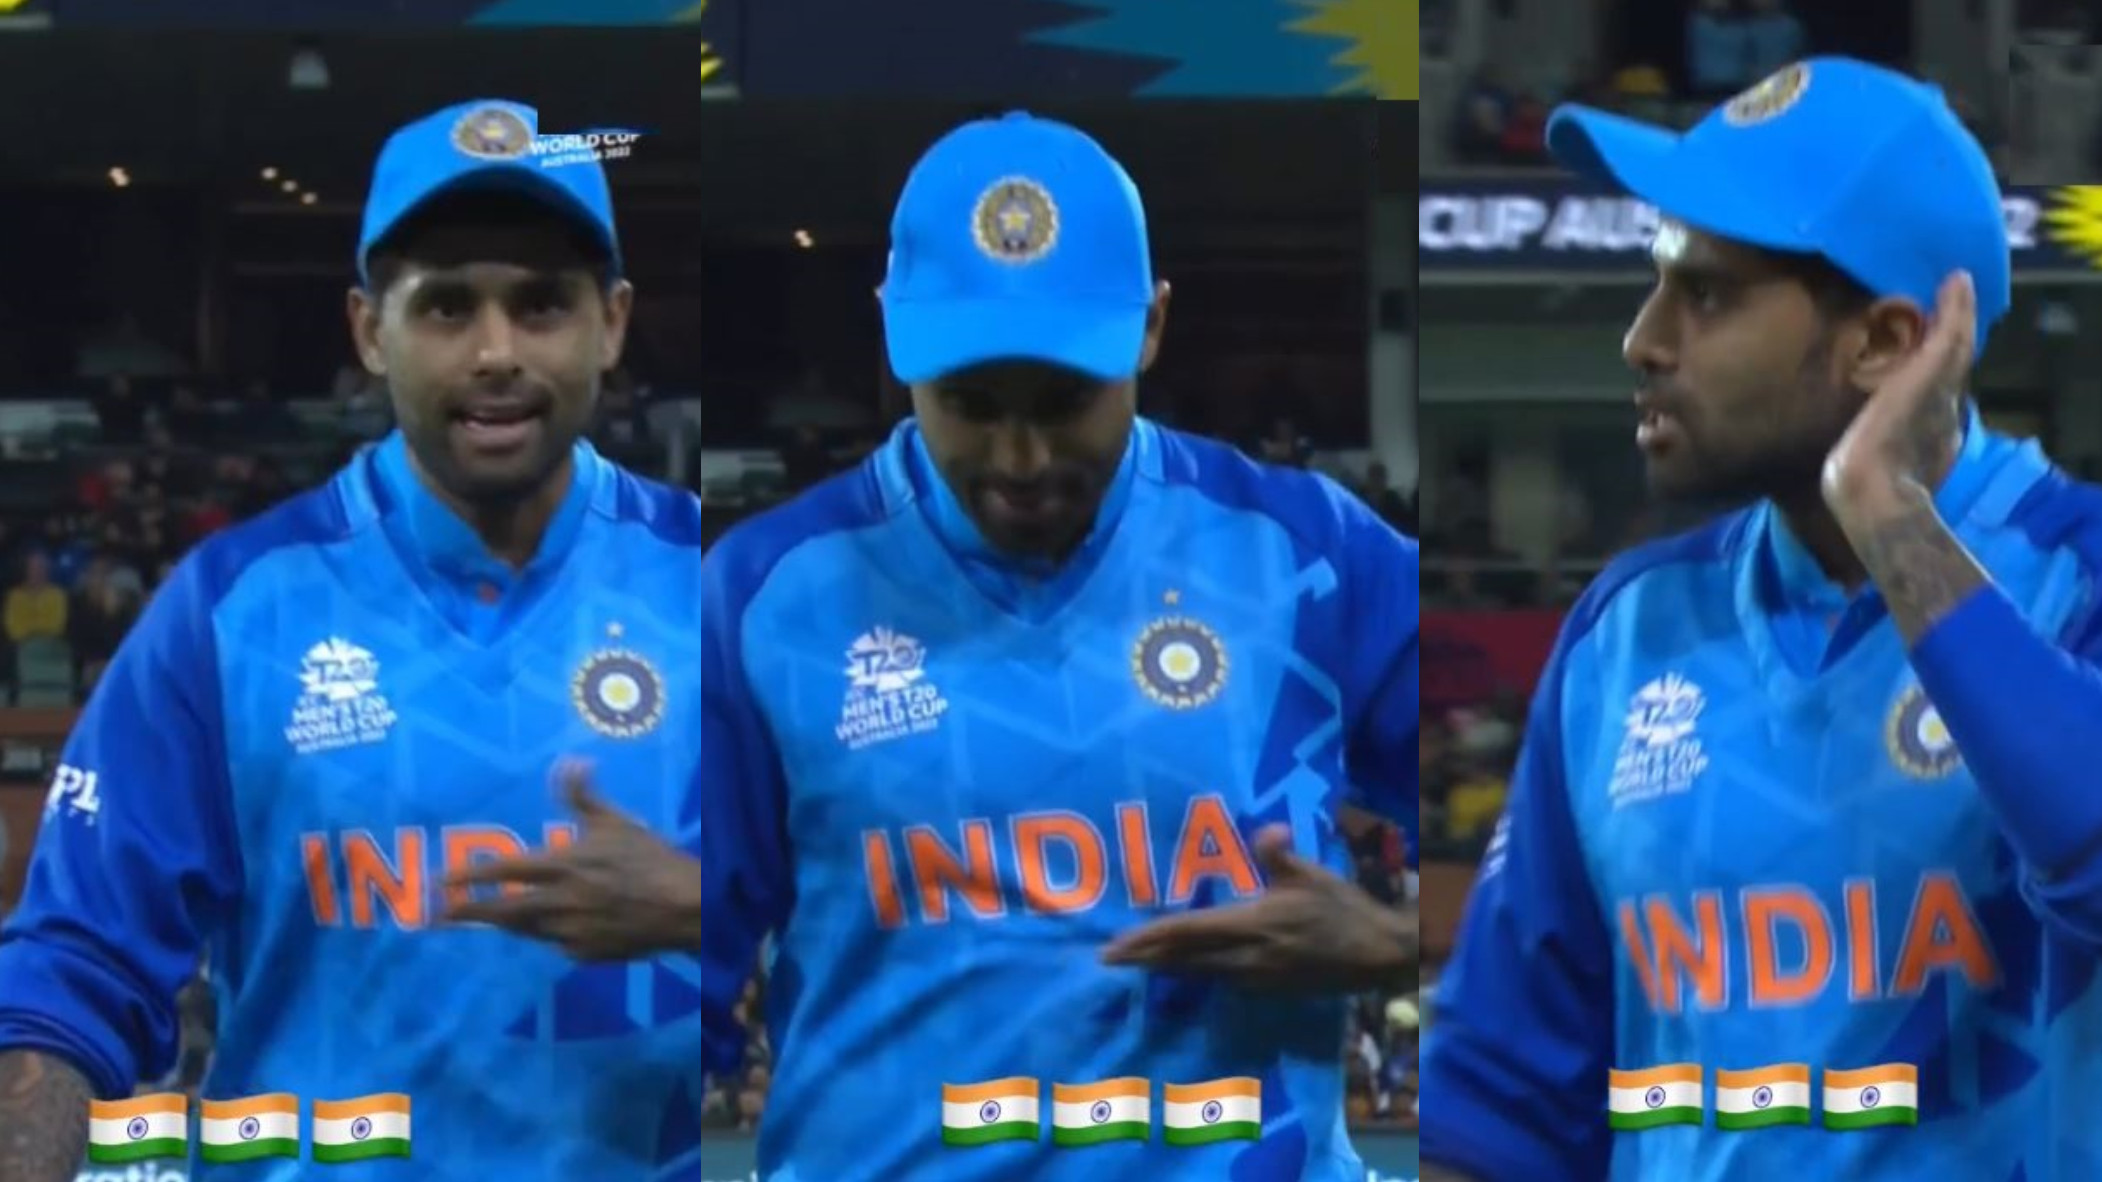 T20 World Cup 2022: WATCH- Suryakumar Yadav gestures towards India on his jersey, asks crowd to make noise